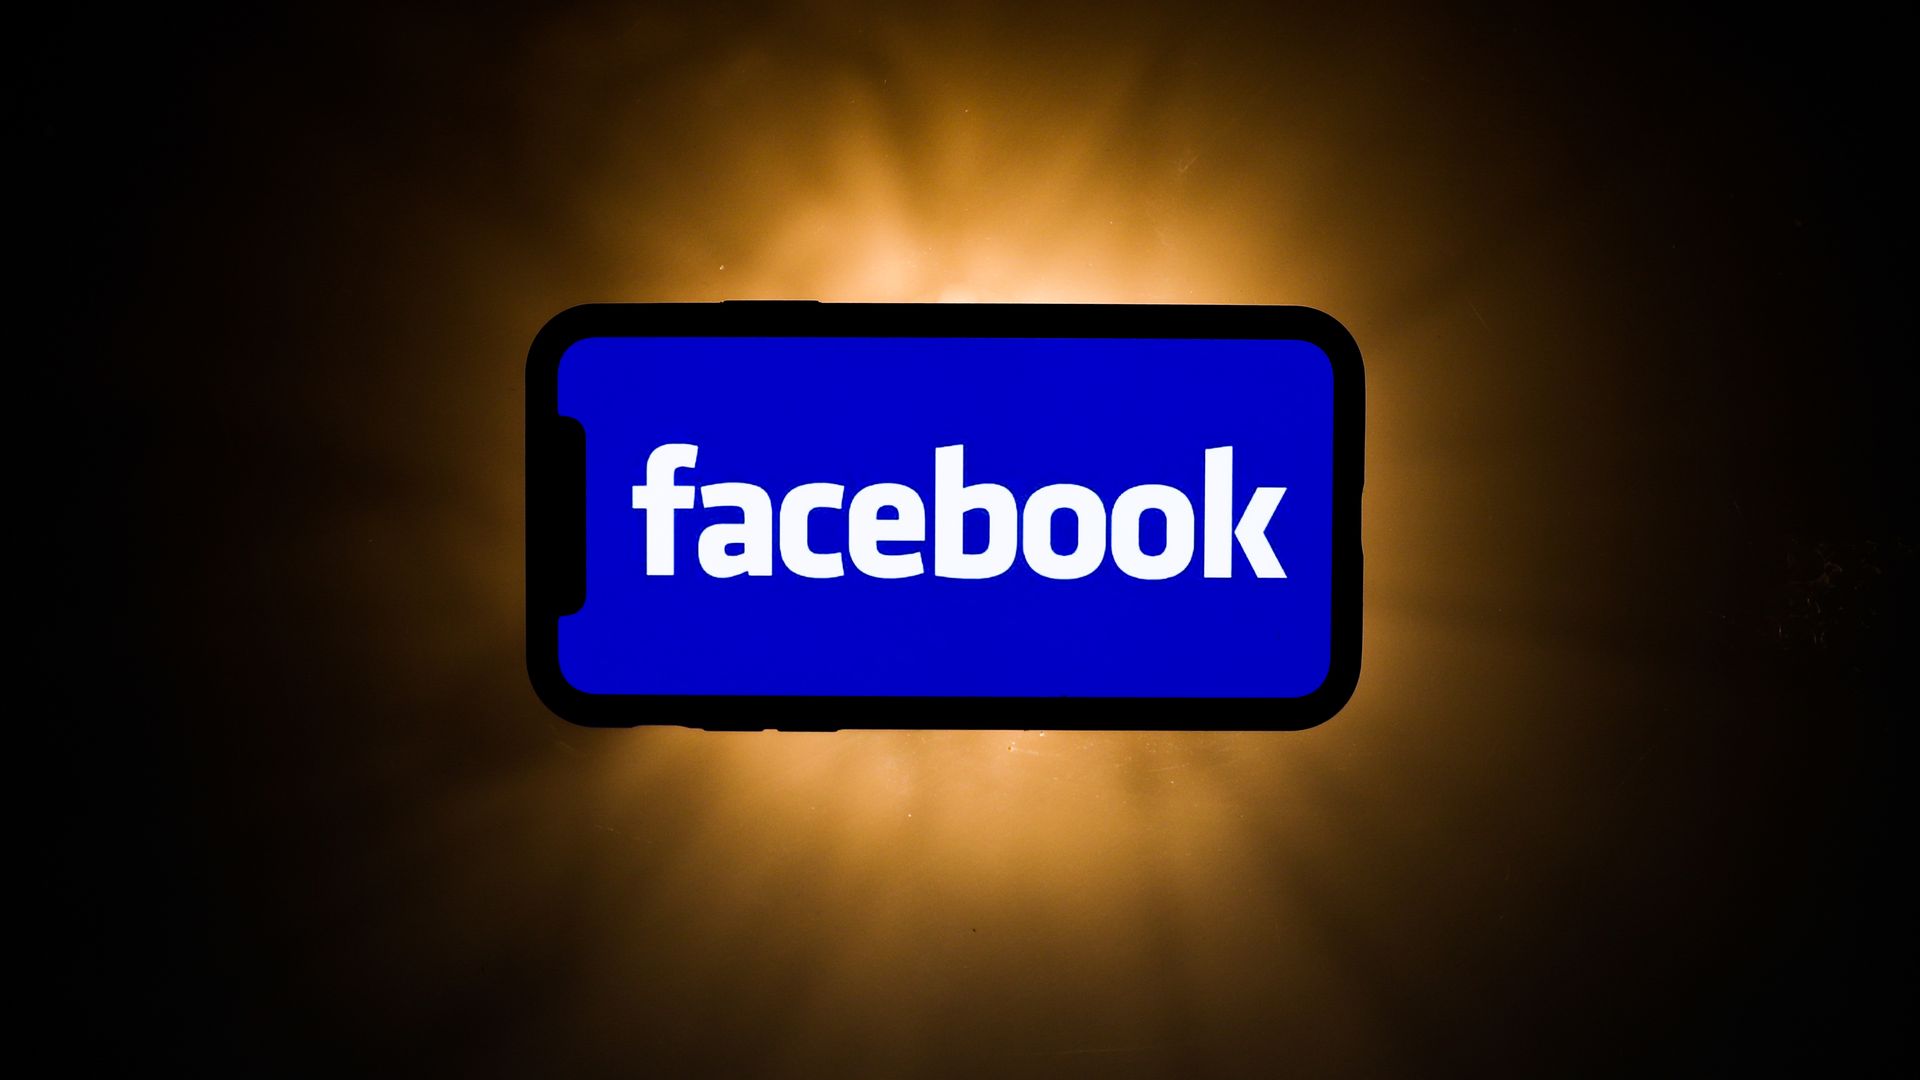 A photo illustration of a smartphone with the Facebook logo displayed prominently on it.